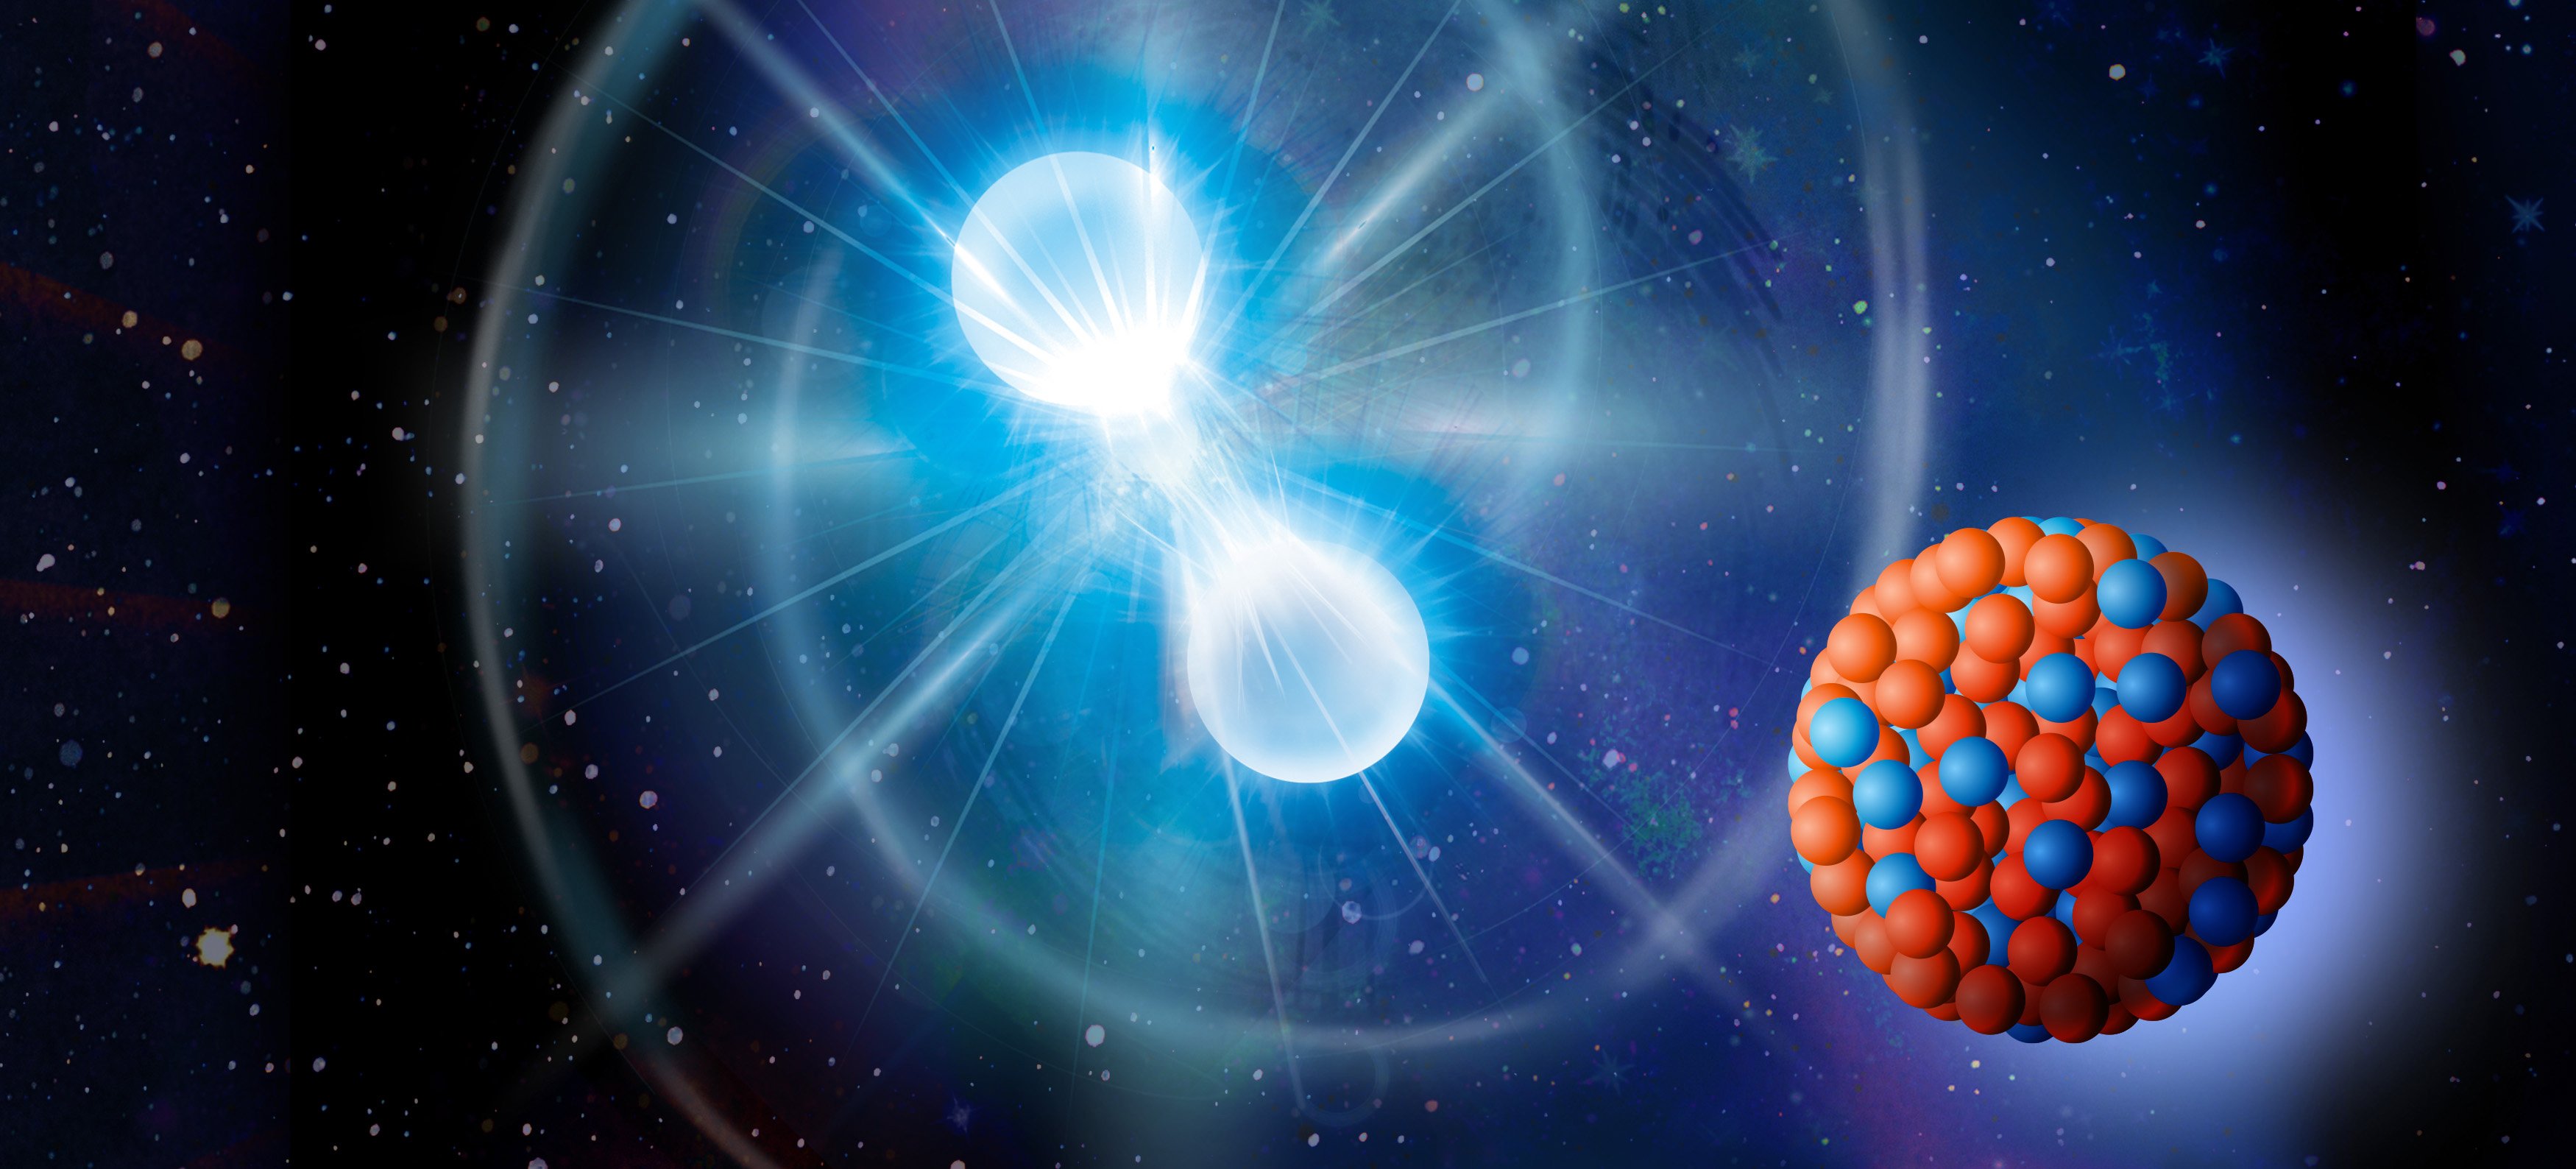 birth of a neutron star and the atomic nucleus of lead